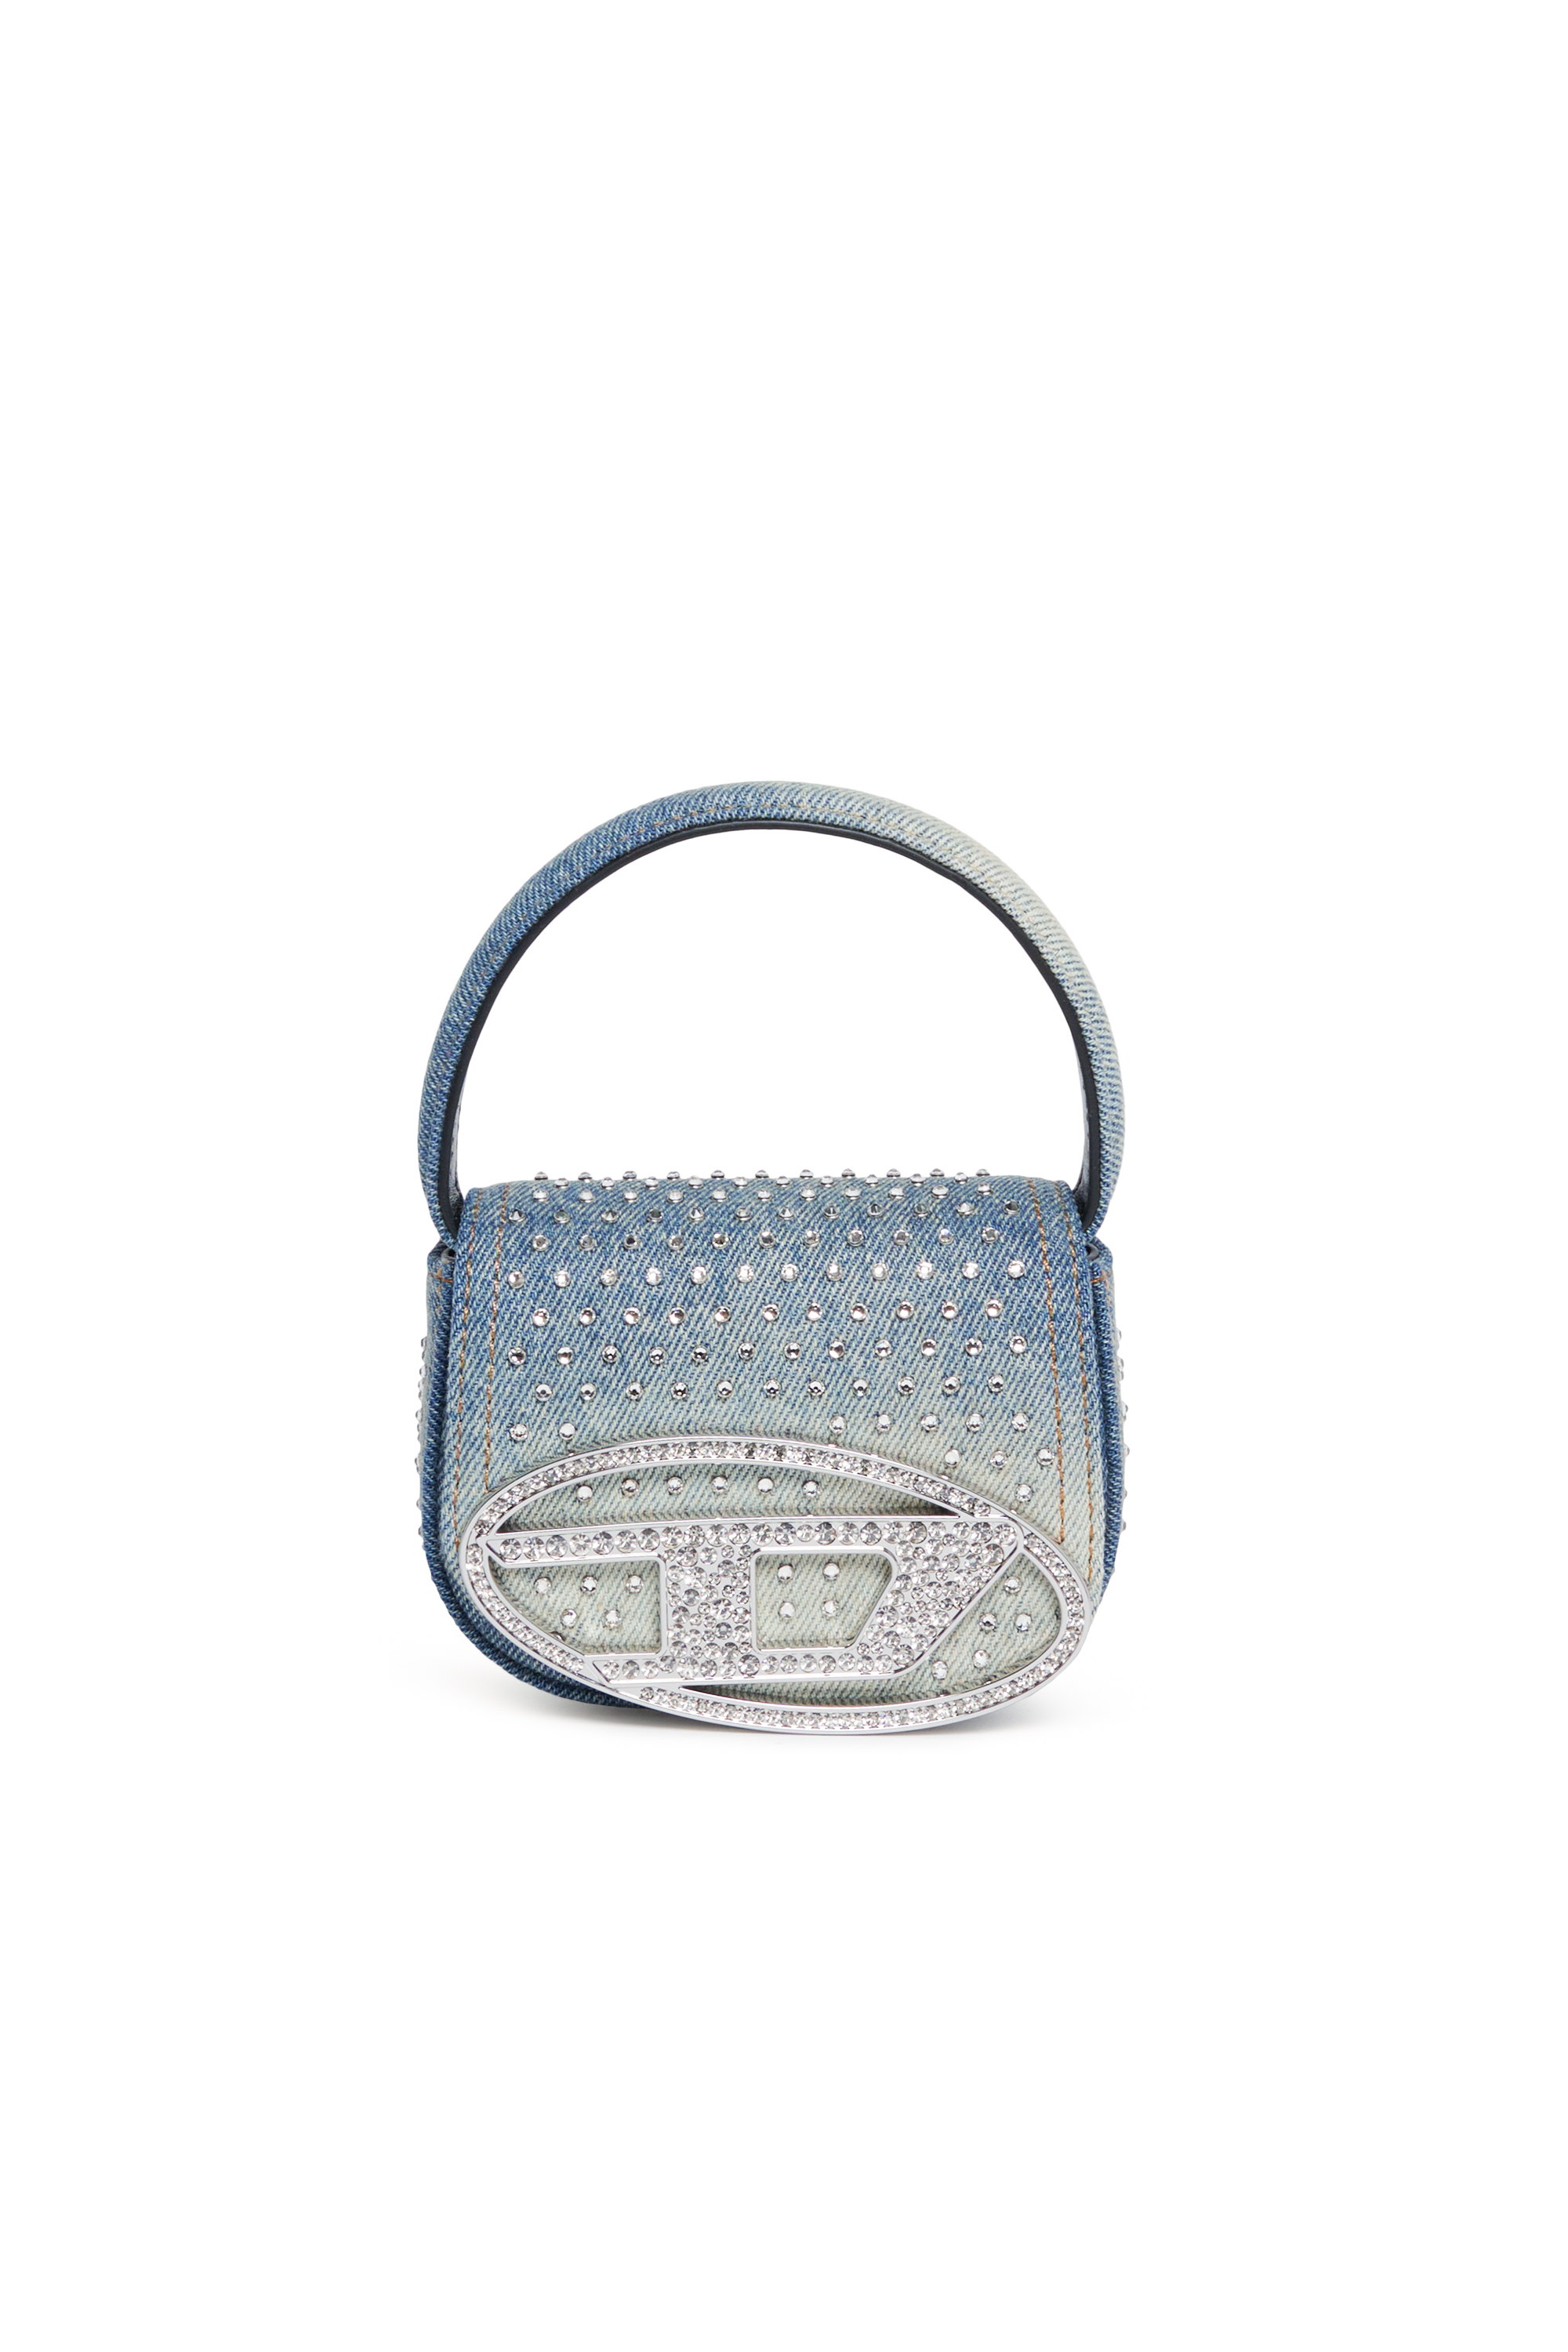 Diesel - 1DR XS, Woman Iconic mini bag in denim and crystals in Blue - Image 1